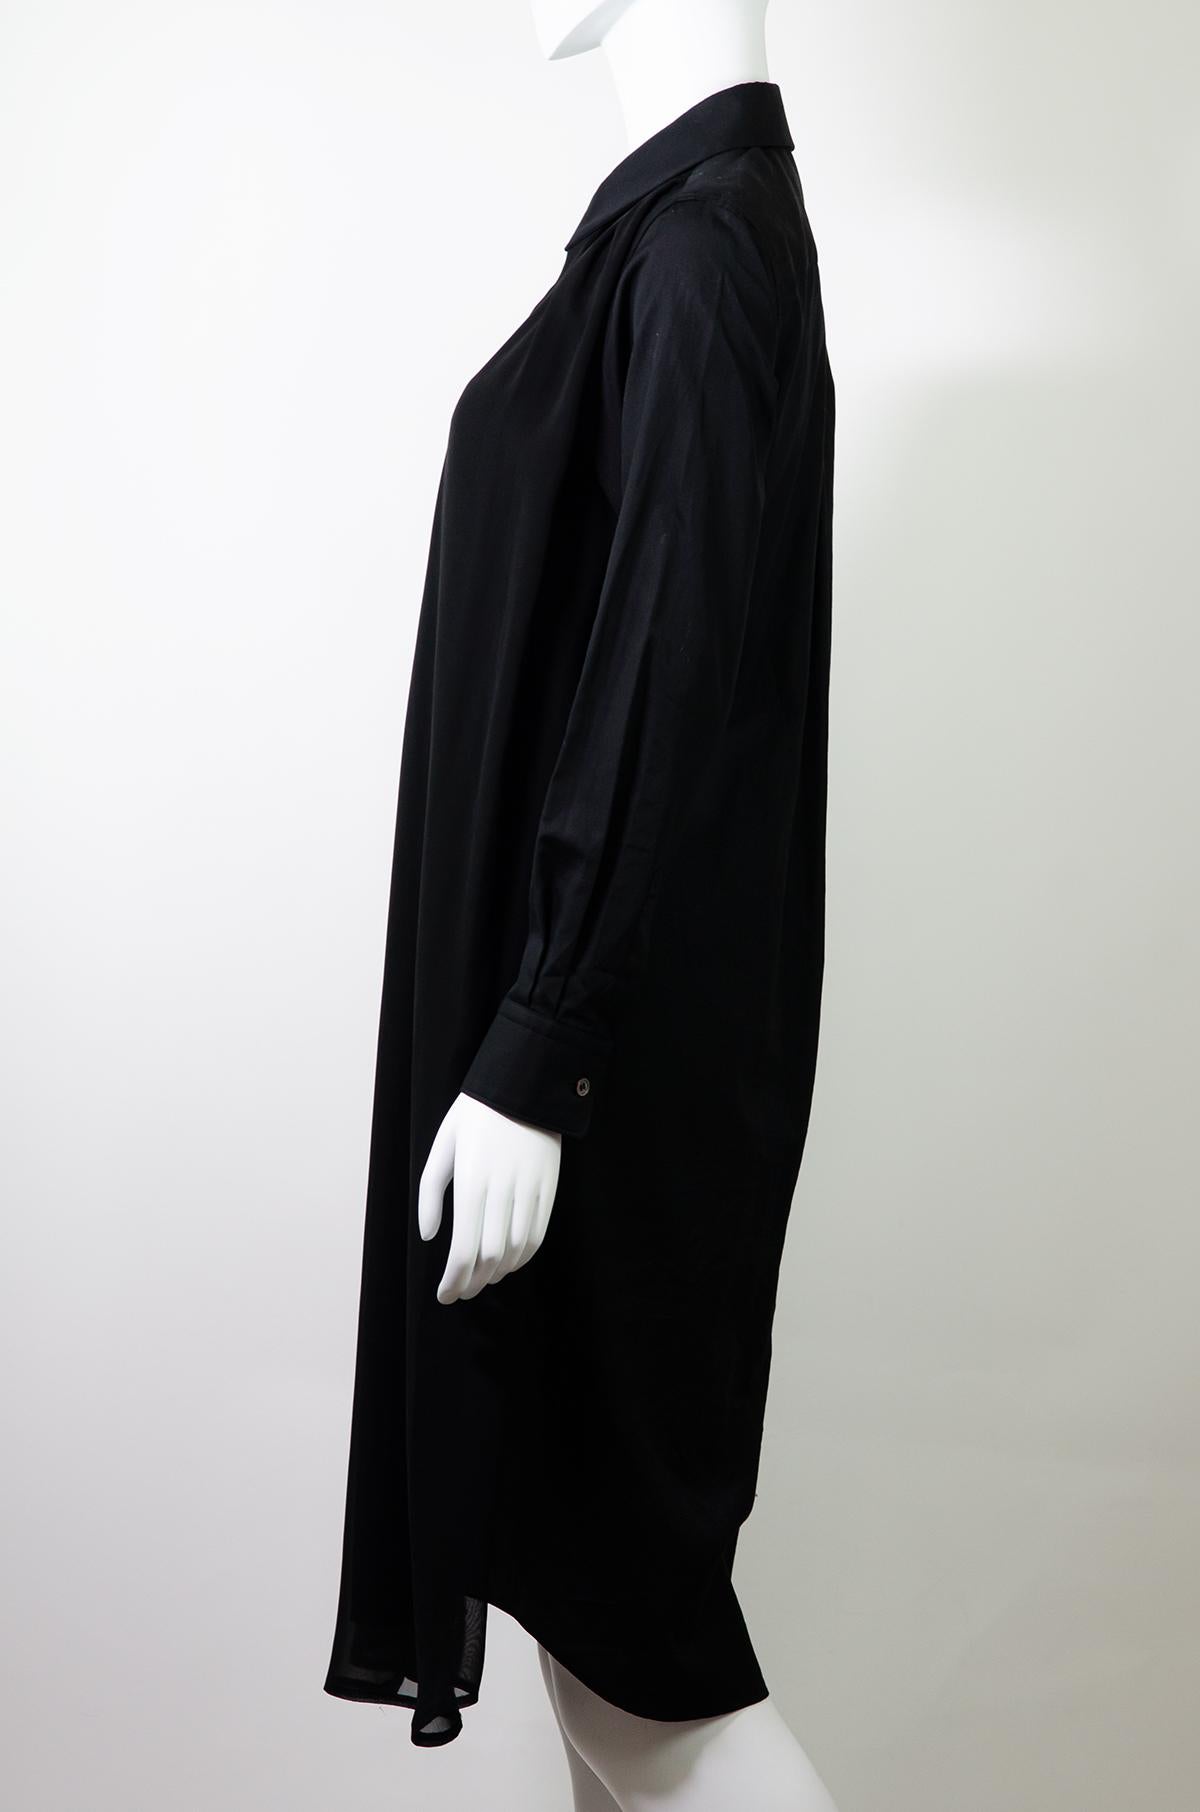 Comme Des Garçons Button-up Black Chiffon Shirt Dress  In Excellent Condition For Sale In Berlin, BE